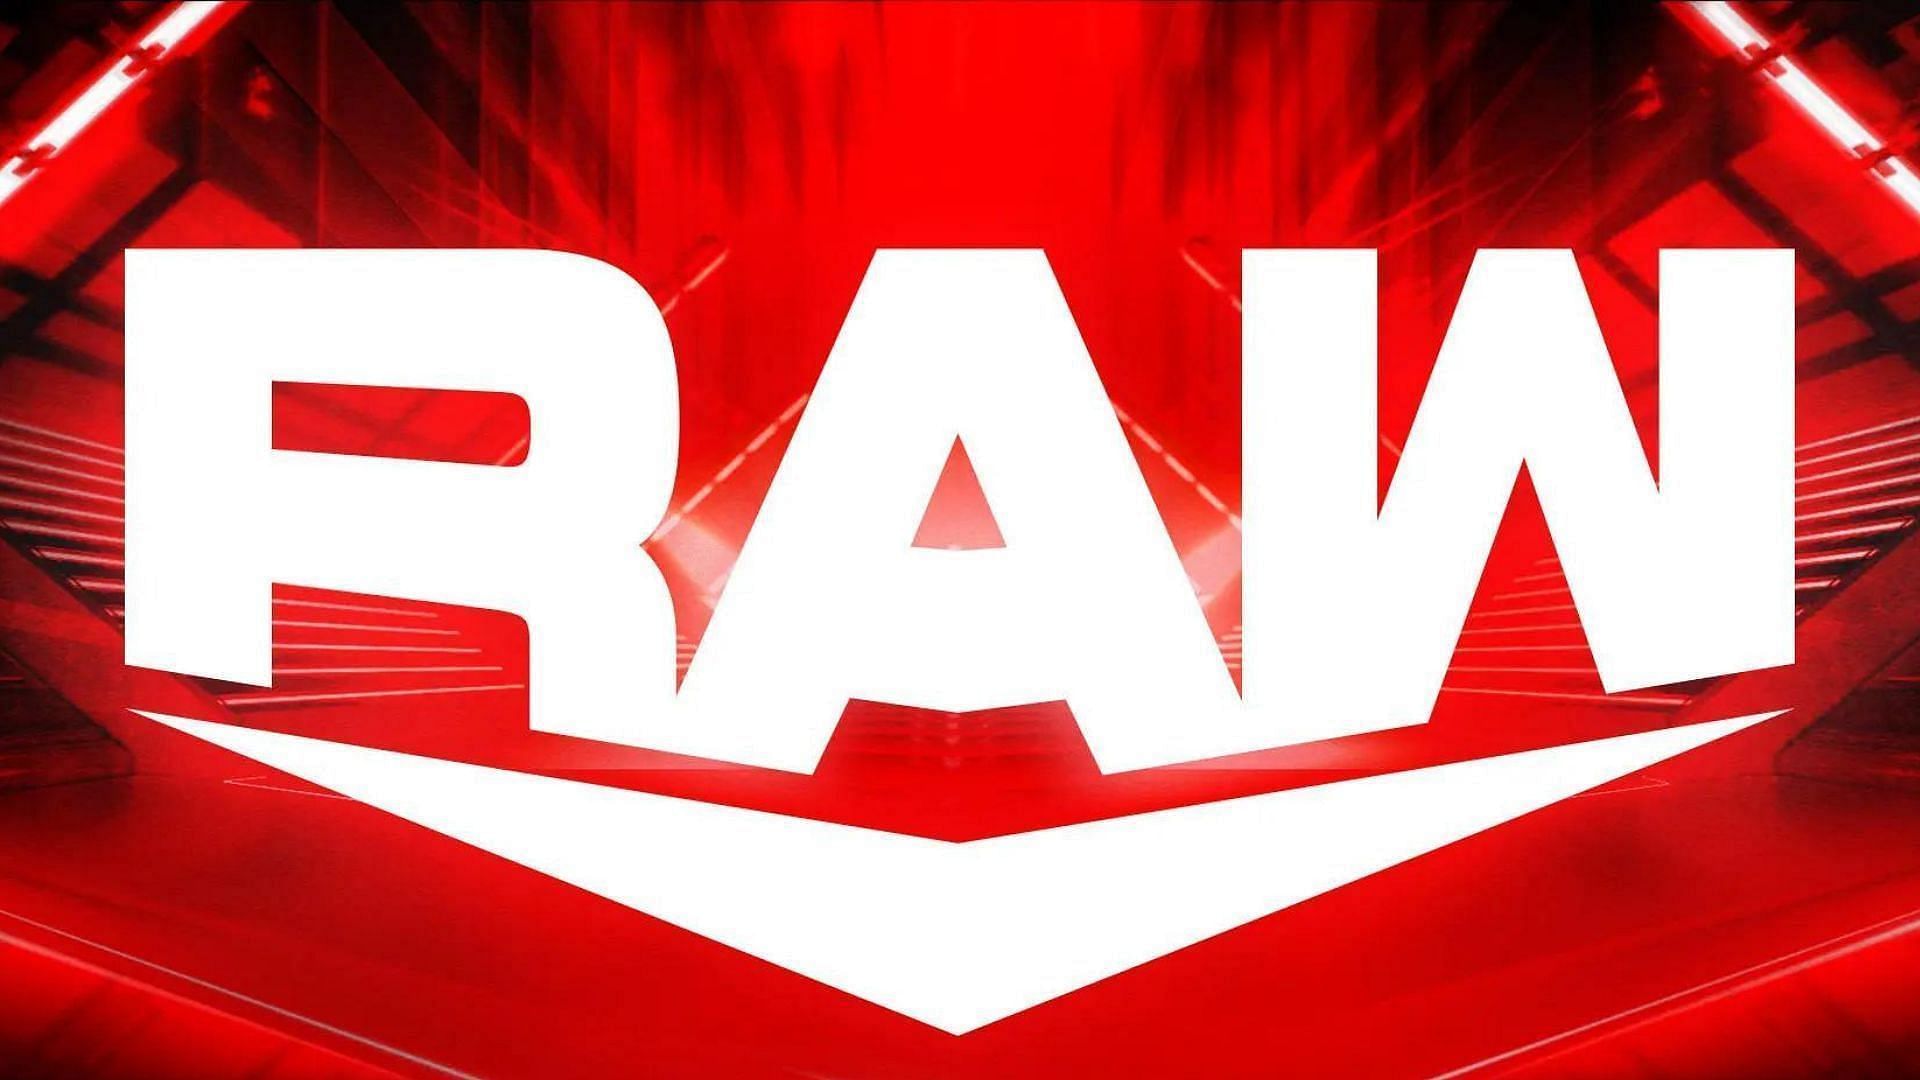 We got a hard-hitting episode of RAW tonight as we head for WWE Payback!